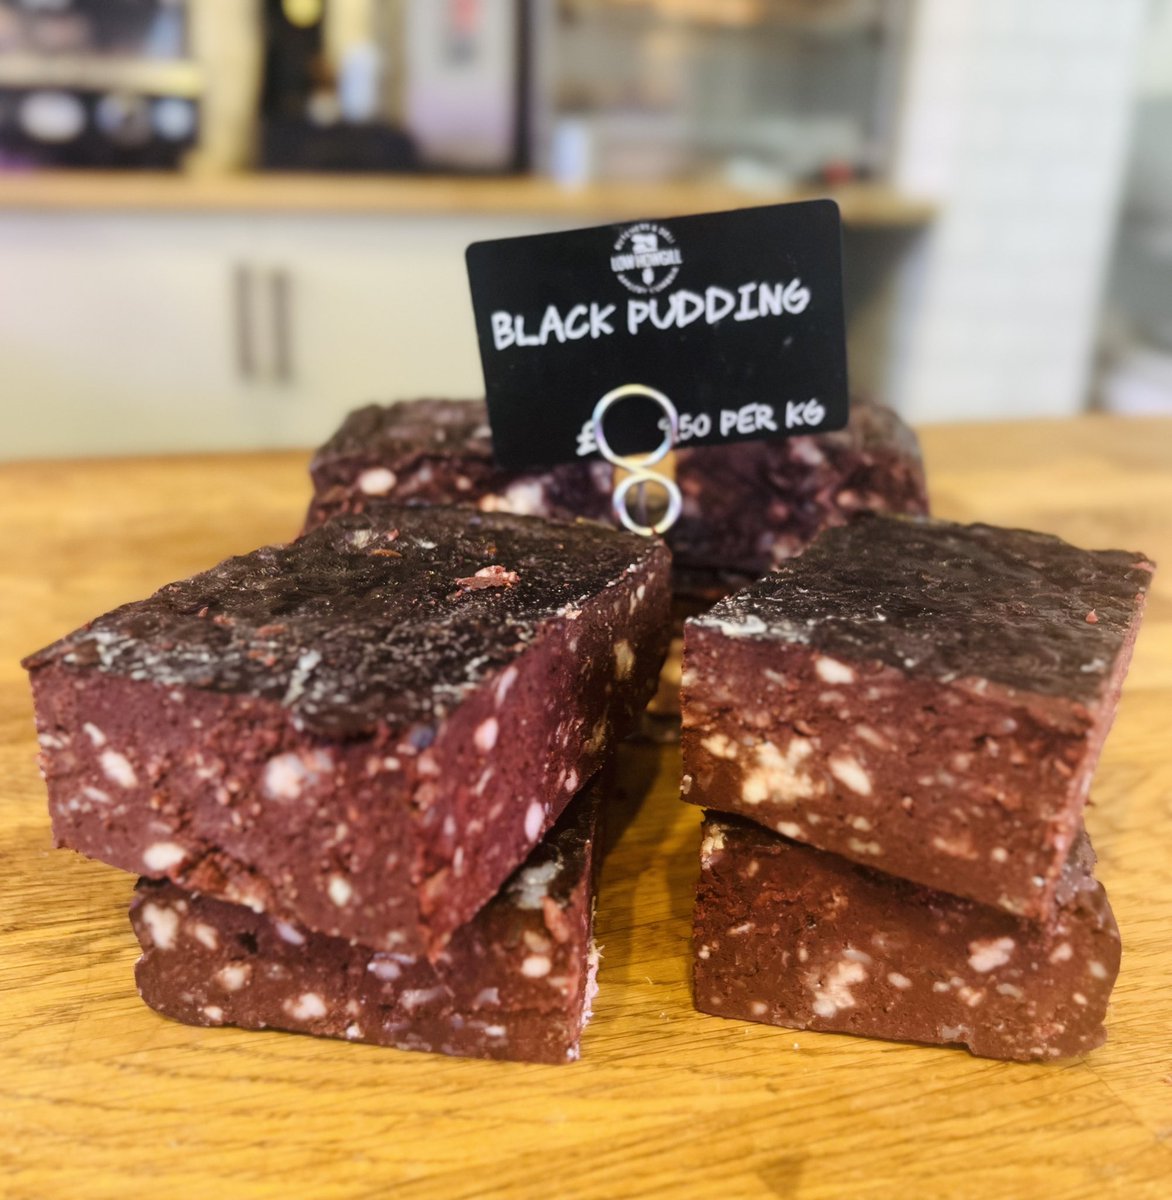 We love a bit of the black stuff! Our handmade Black Pud can always be found in our deli counter. #NationalBlackPuddingDay